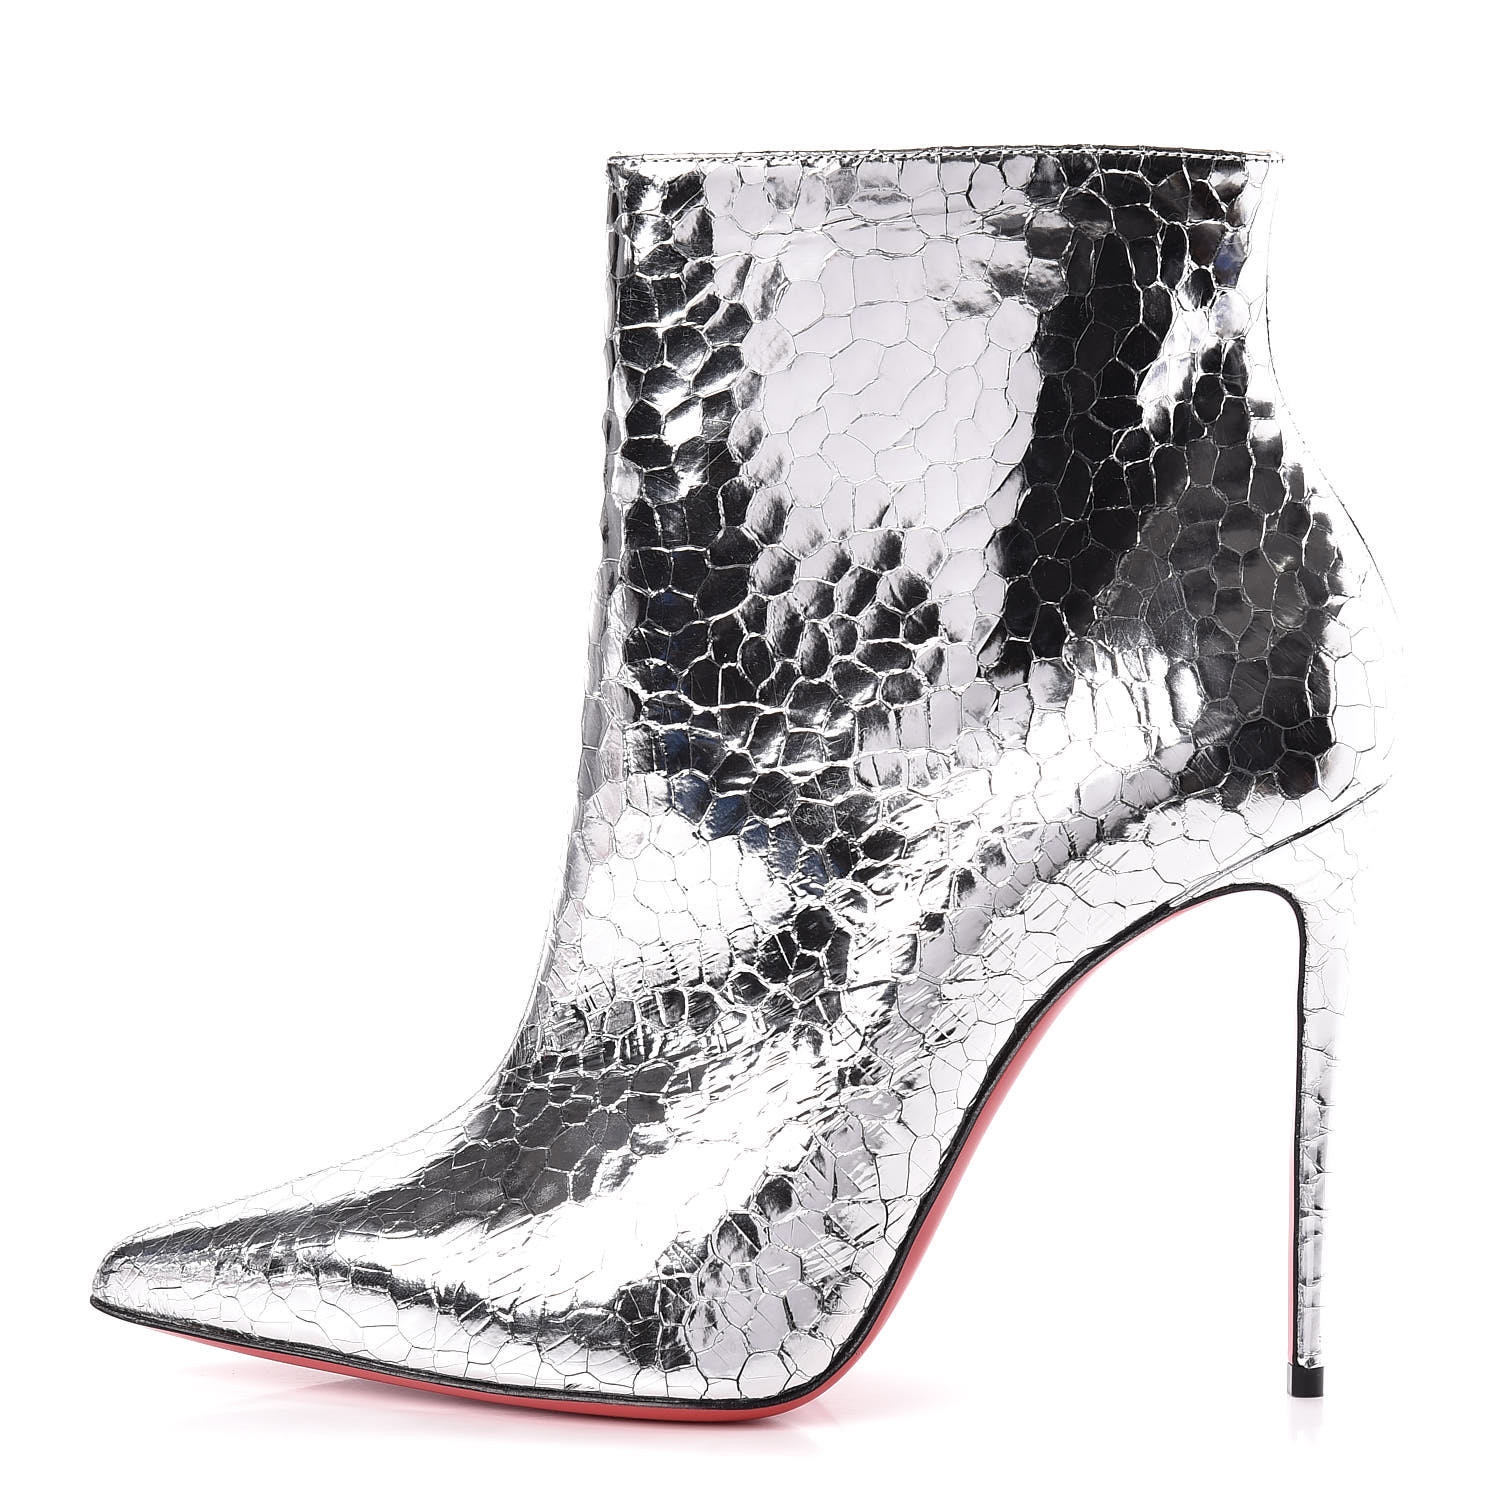 louboutin silver booties